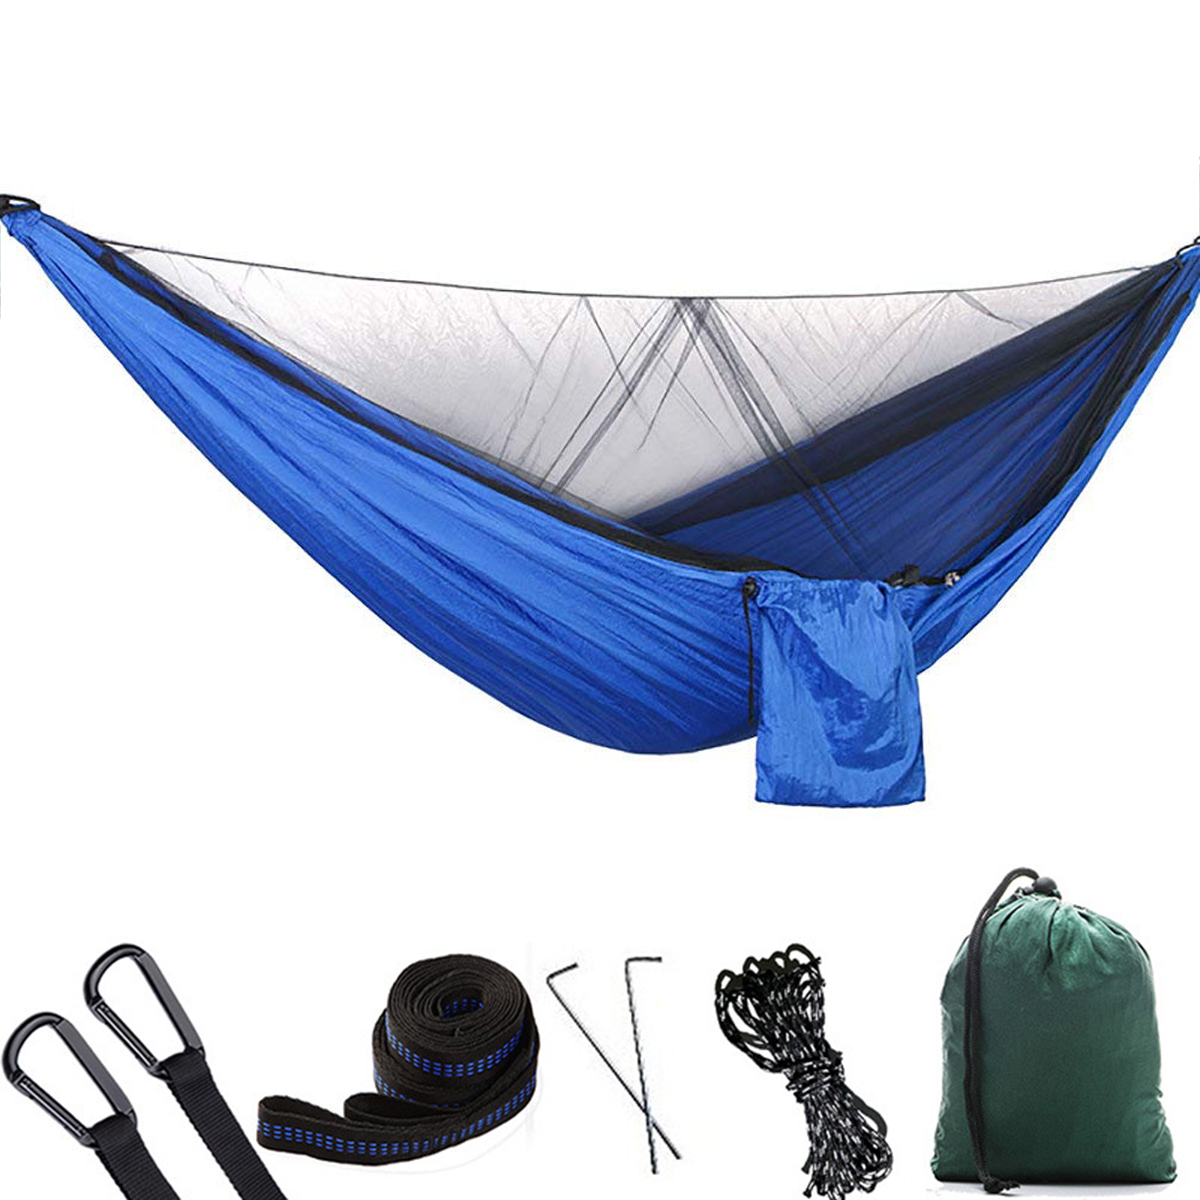 

1-2 Person Portable Outdoor Camping Hammock with Mosquito Net High Strength Parachute Fabric Hanging Bed Hunting Sleepin